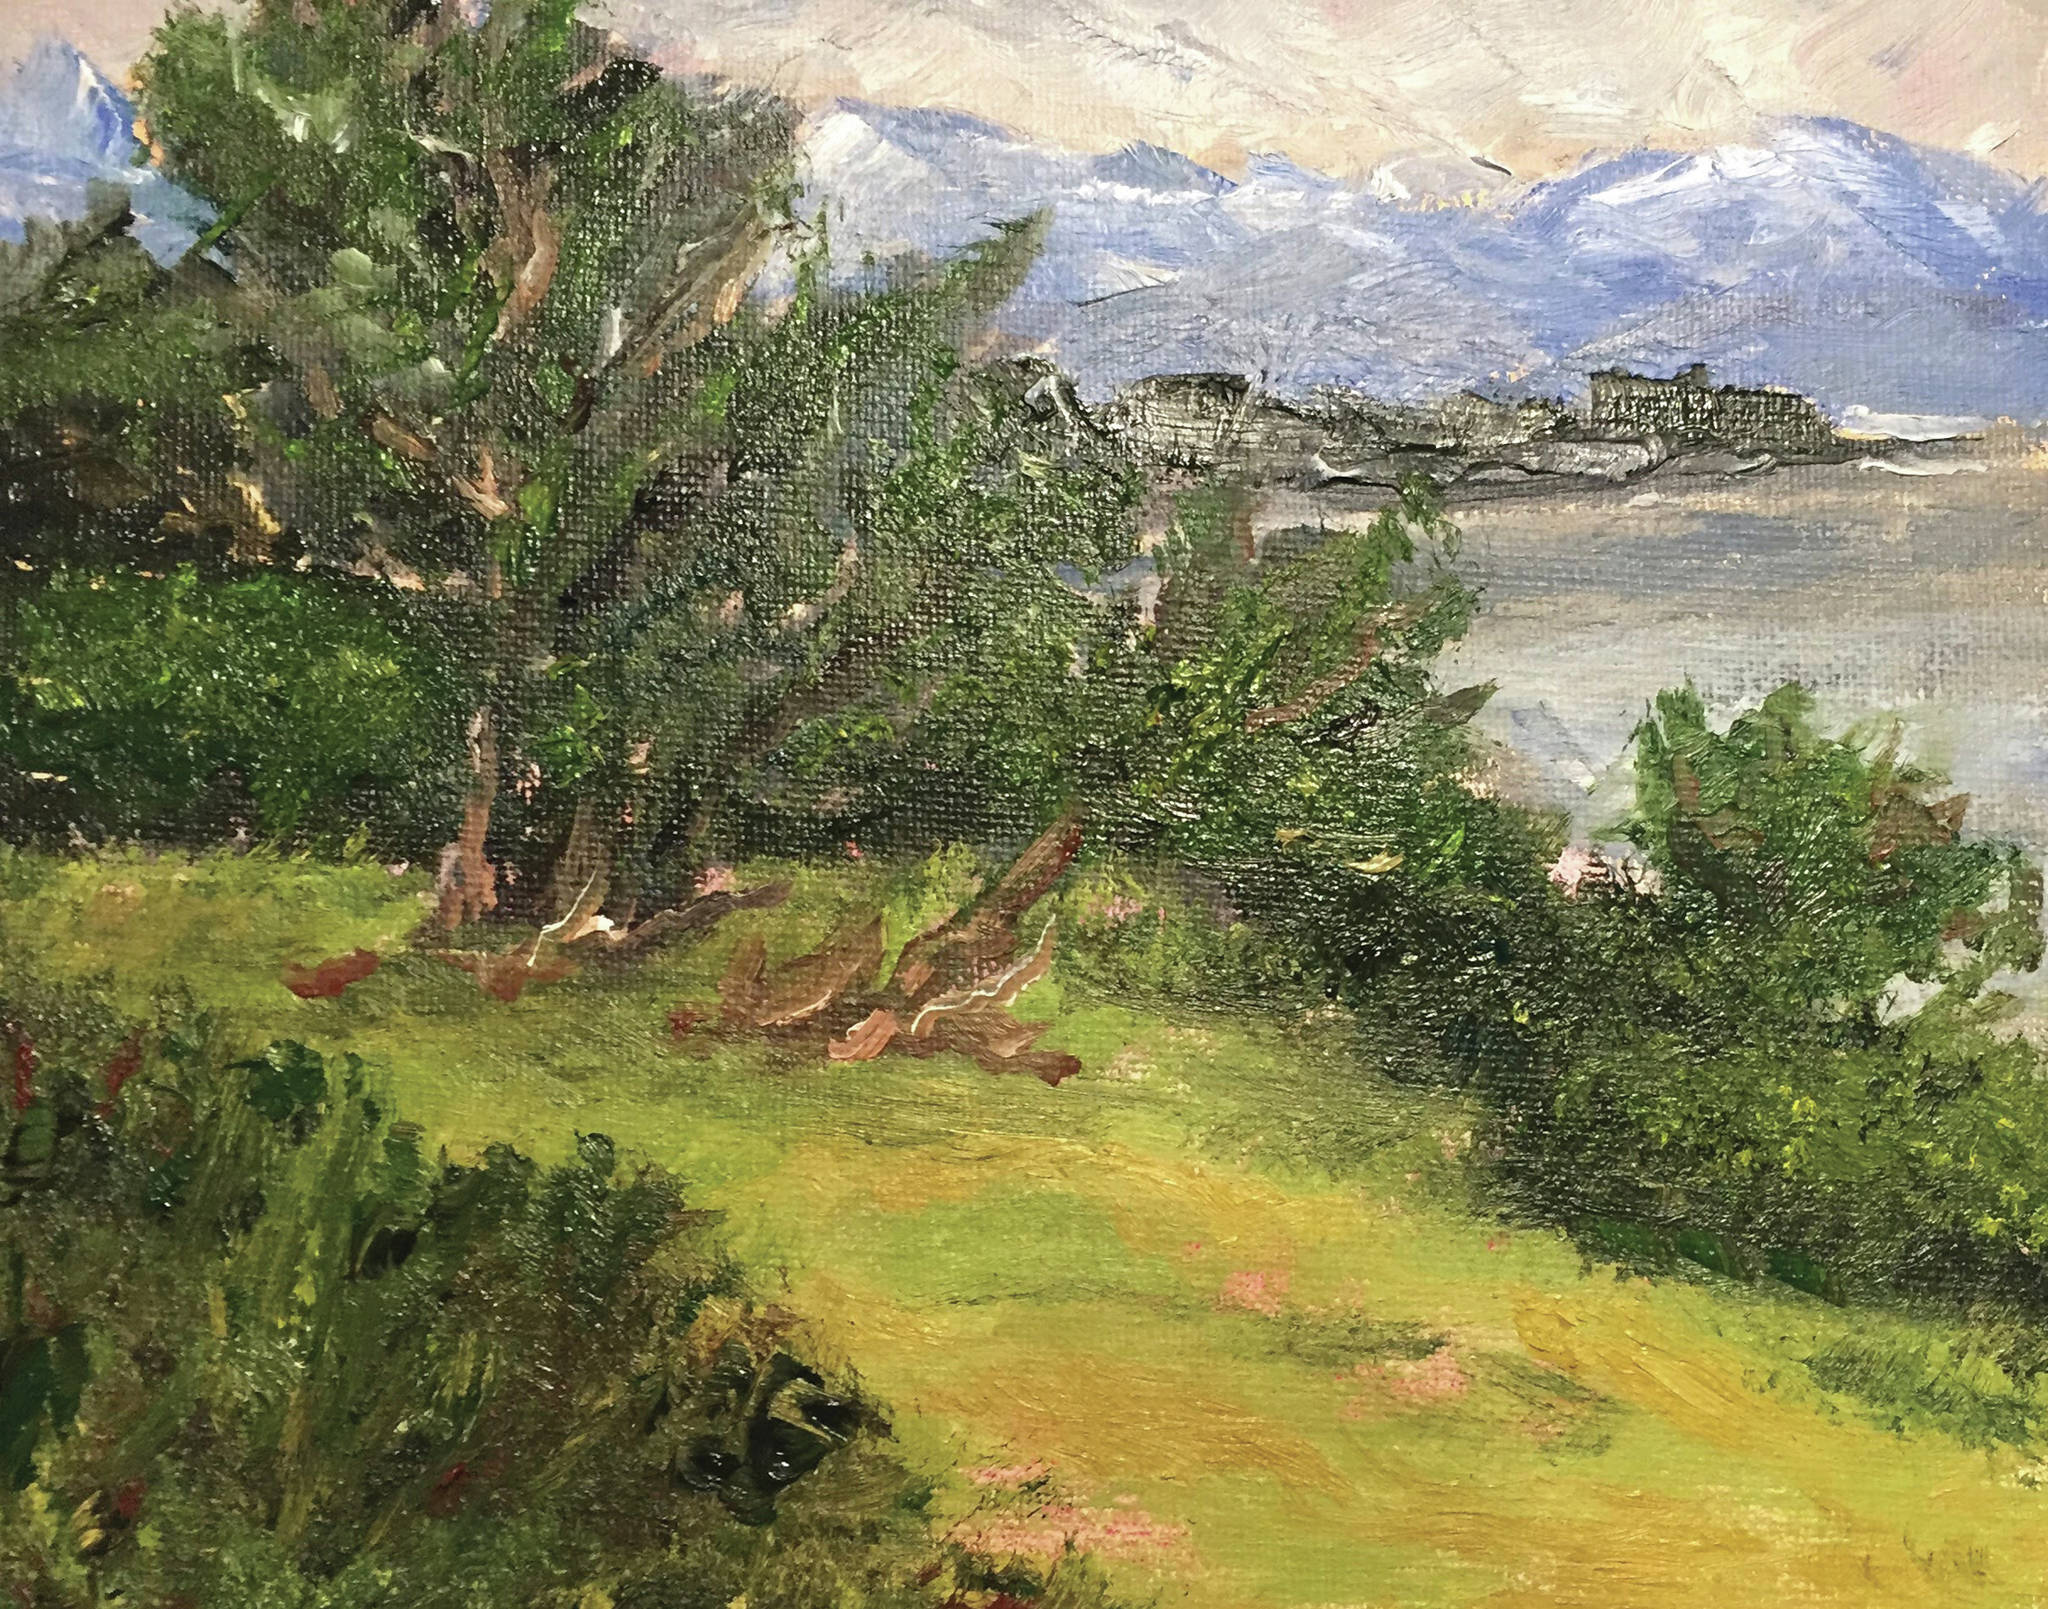 A painting by Kathi Drew in the Second Annual En Plein Air show opening Friday, Oct. 4, 2019, at Ptarmigan Arts in Homer, Alaska. (Photo provided)